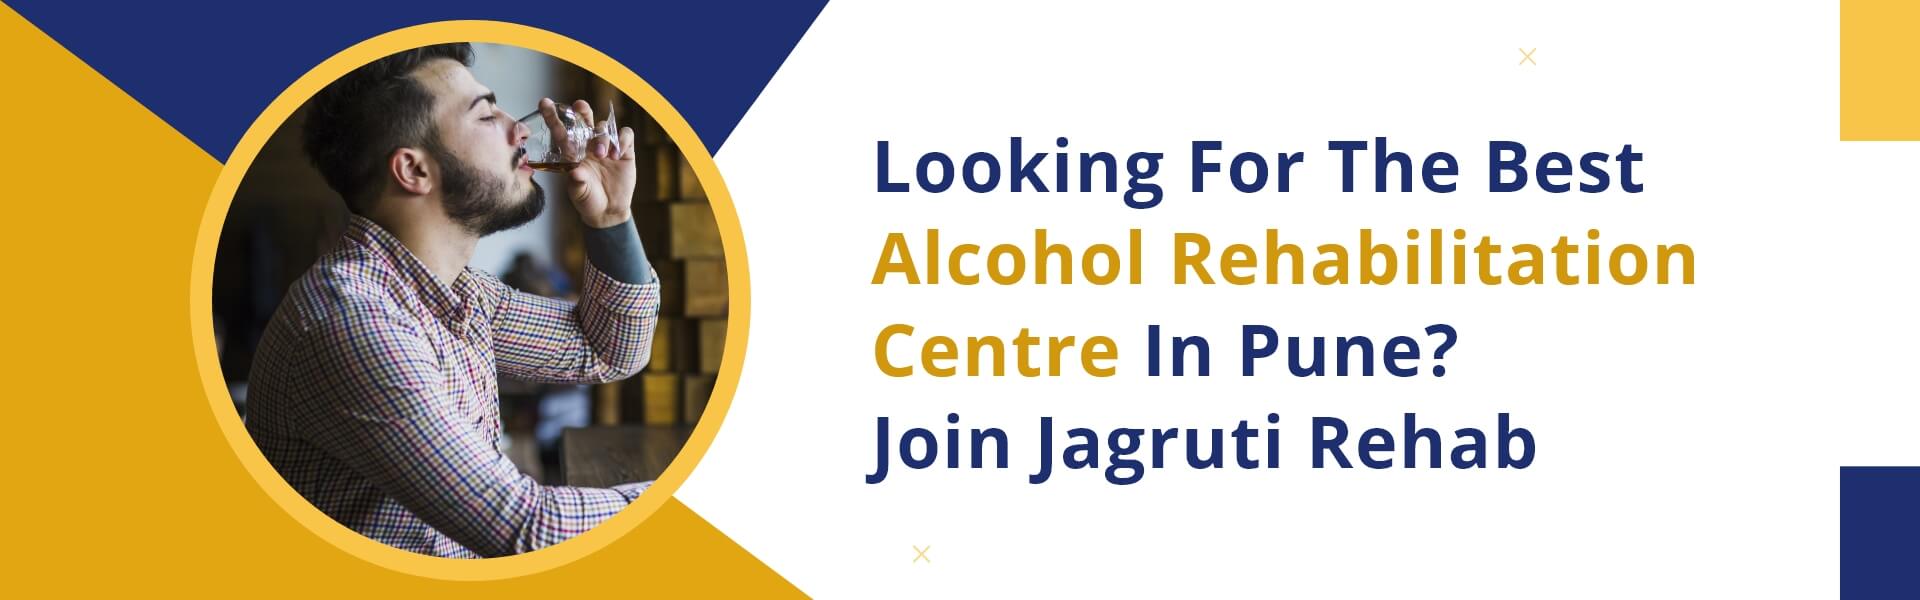 Looking For The Best Alcohol Rehabilitation Centre in Pune? Join Jagruti Rehab